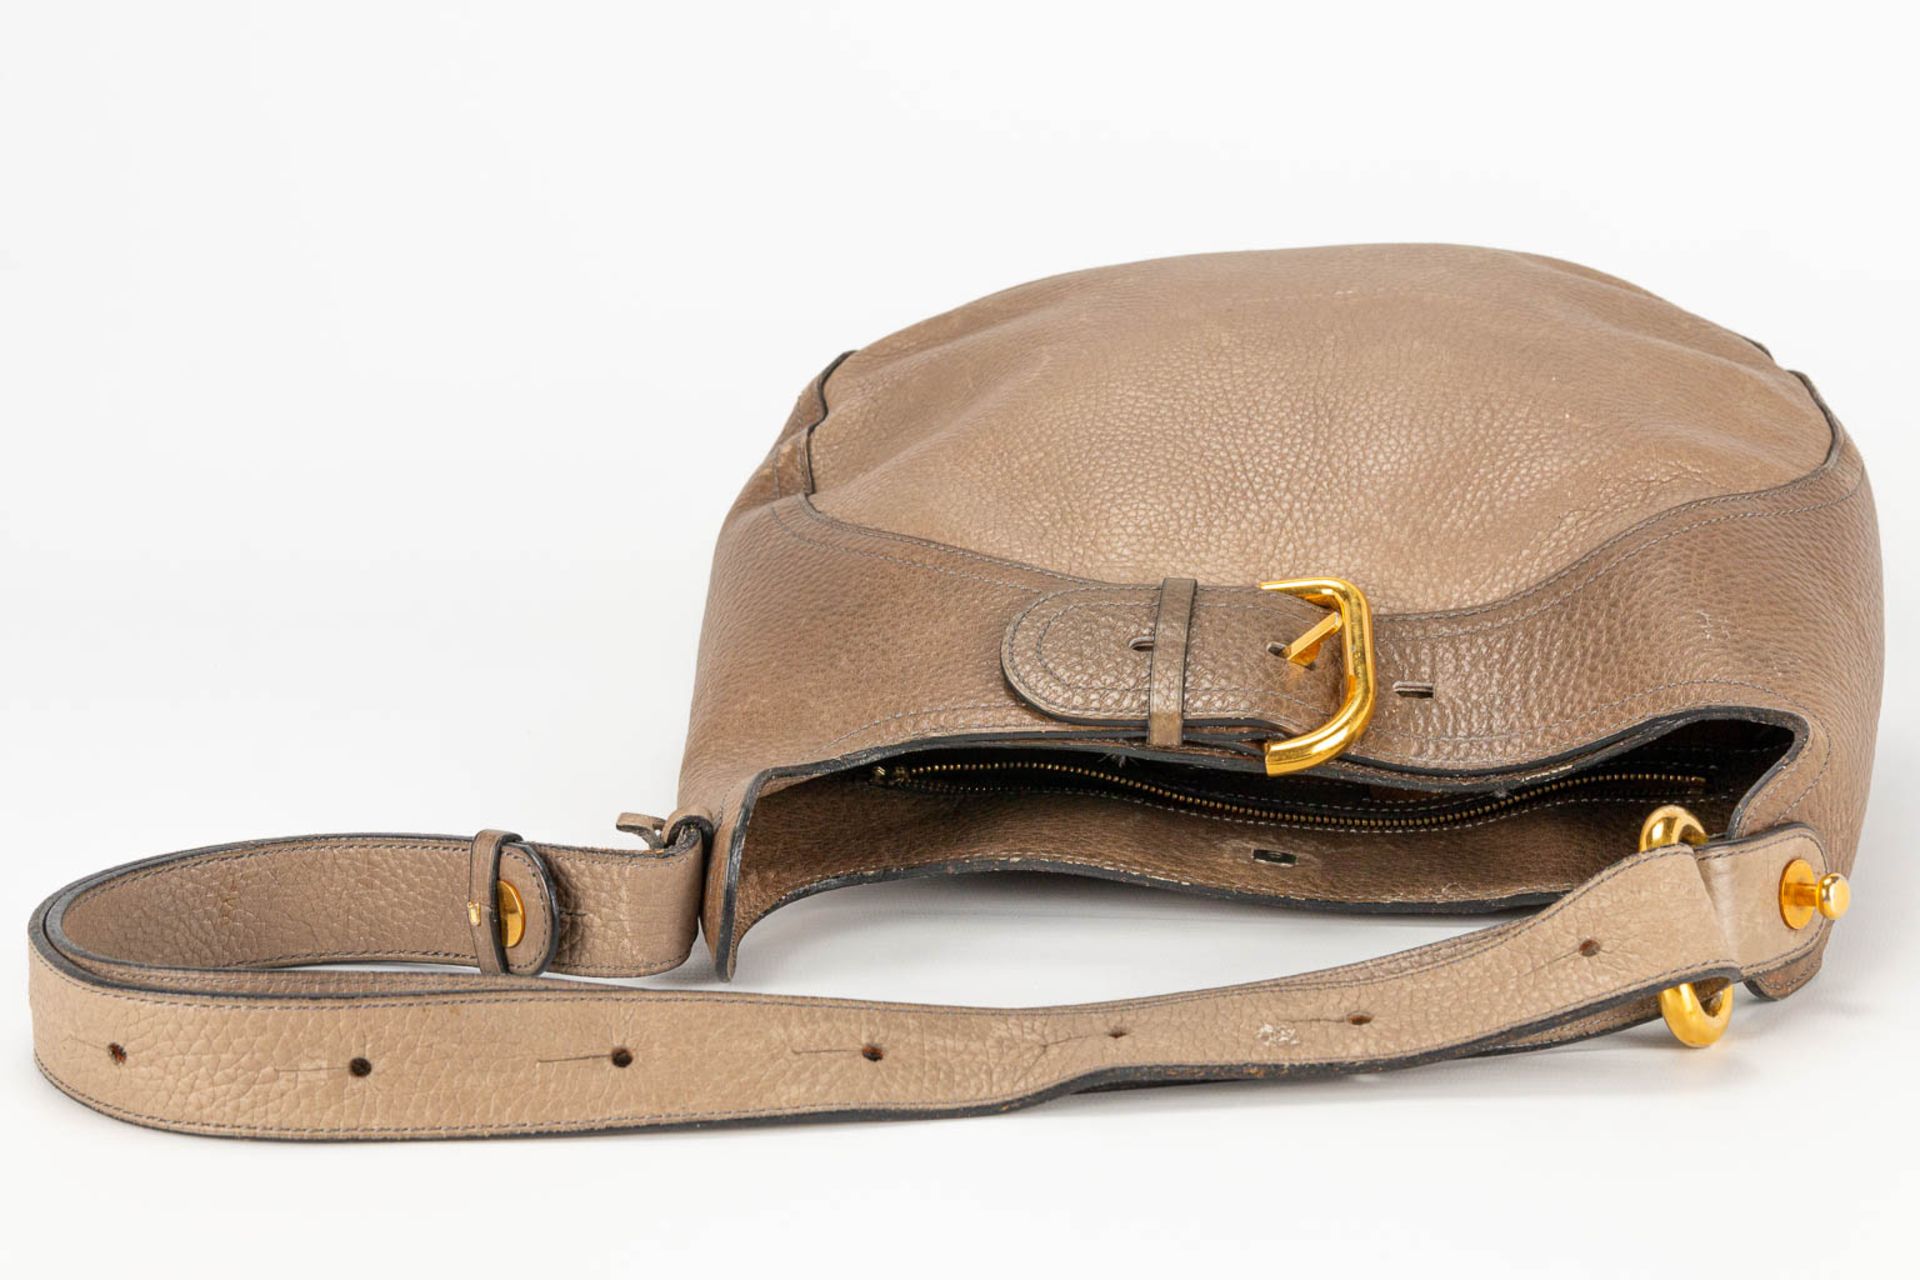 A purse made of brown leather and marked Delvaux. - Image 8 of 16